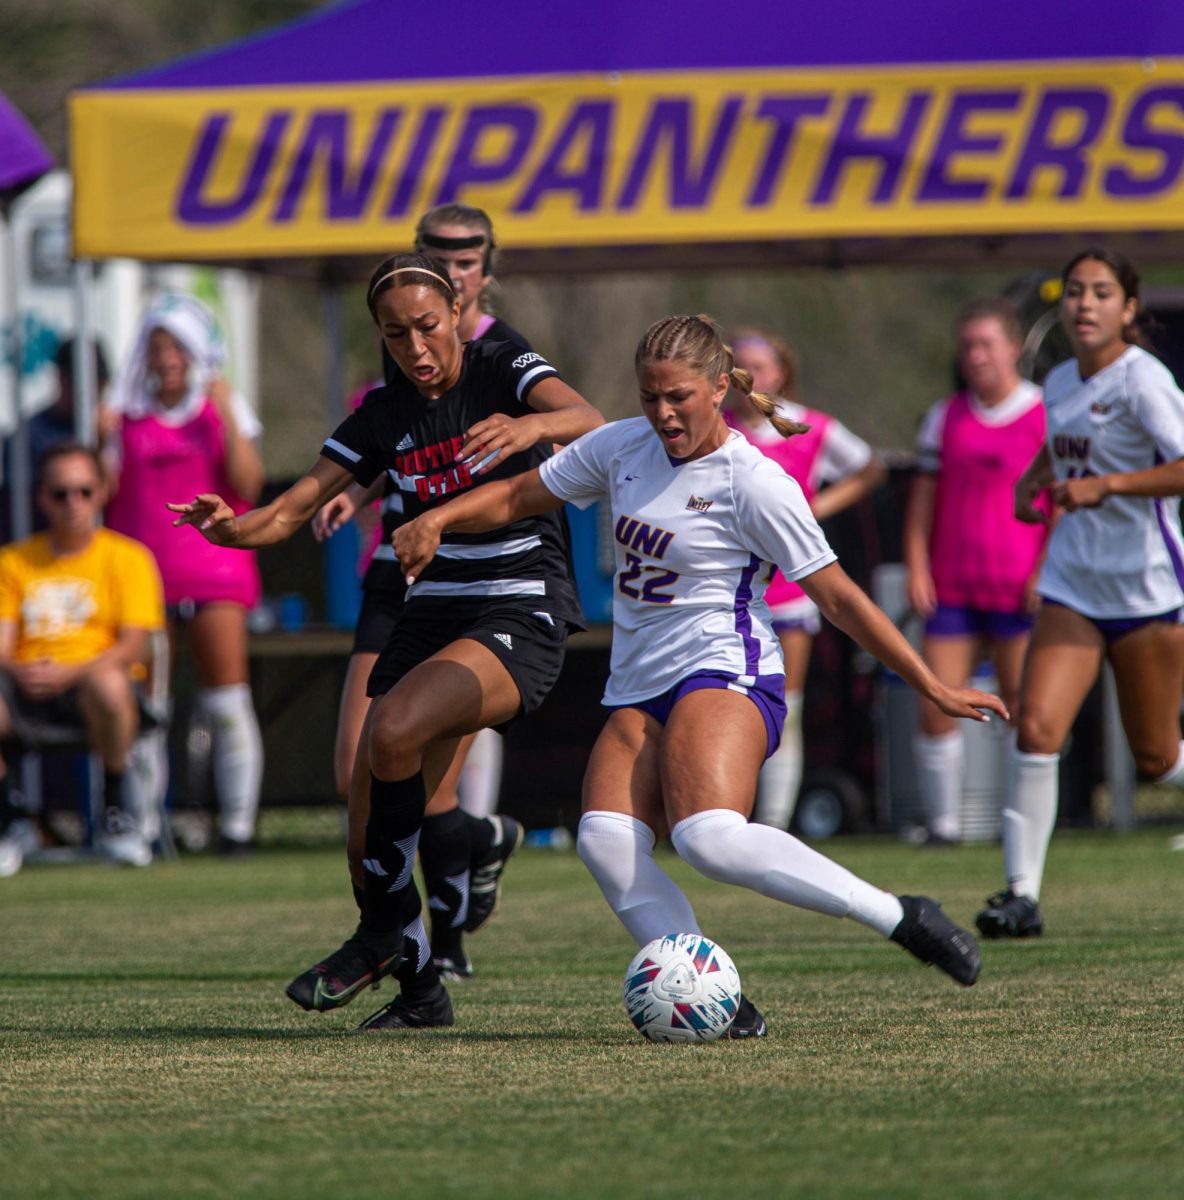 The Panthers pulled out an impossible victory in the last minute of play against Southern Utah.